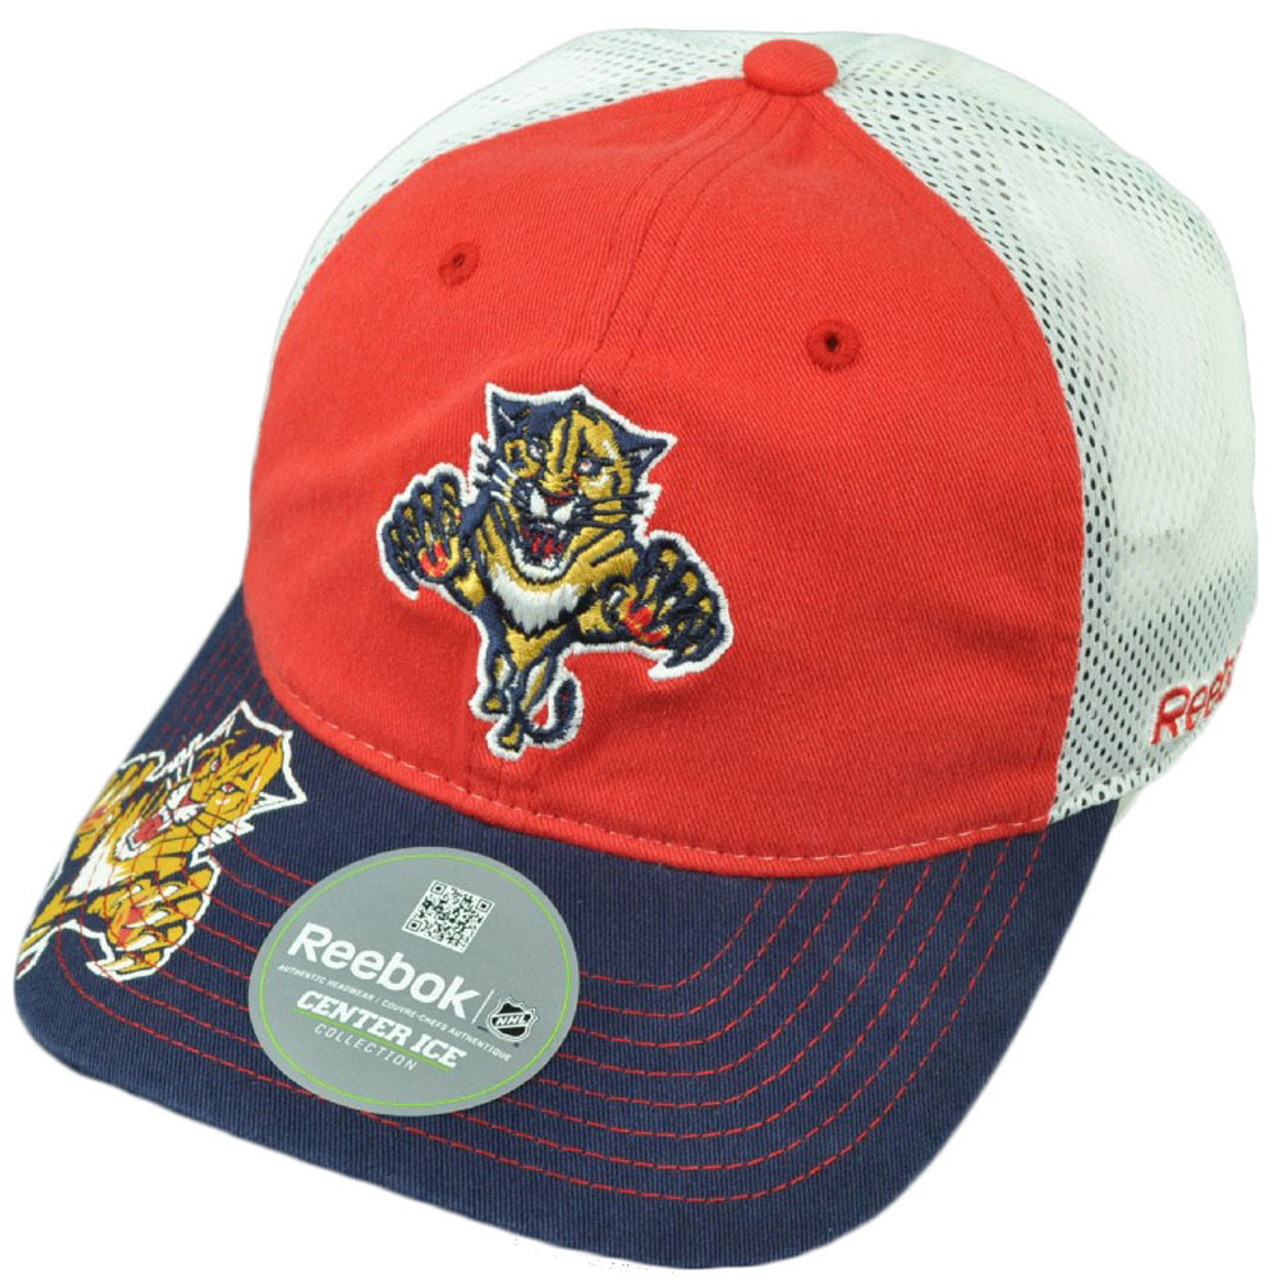 NHL Reebok Florida Panthers ES18 Fit Small Medium Mesh Relaxed Hat Red - Cap Online.com